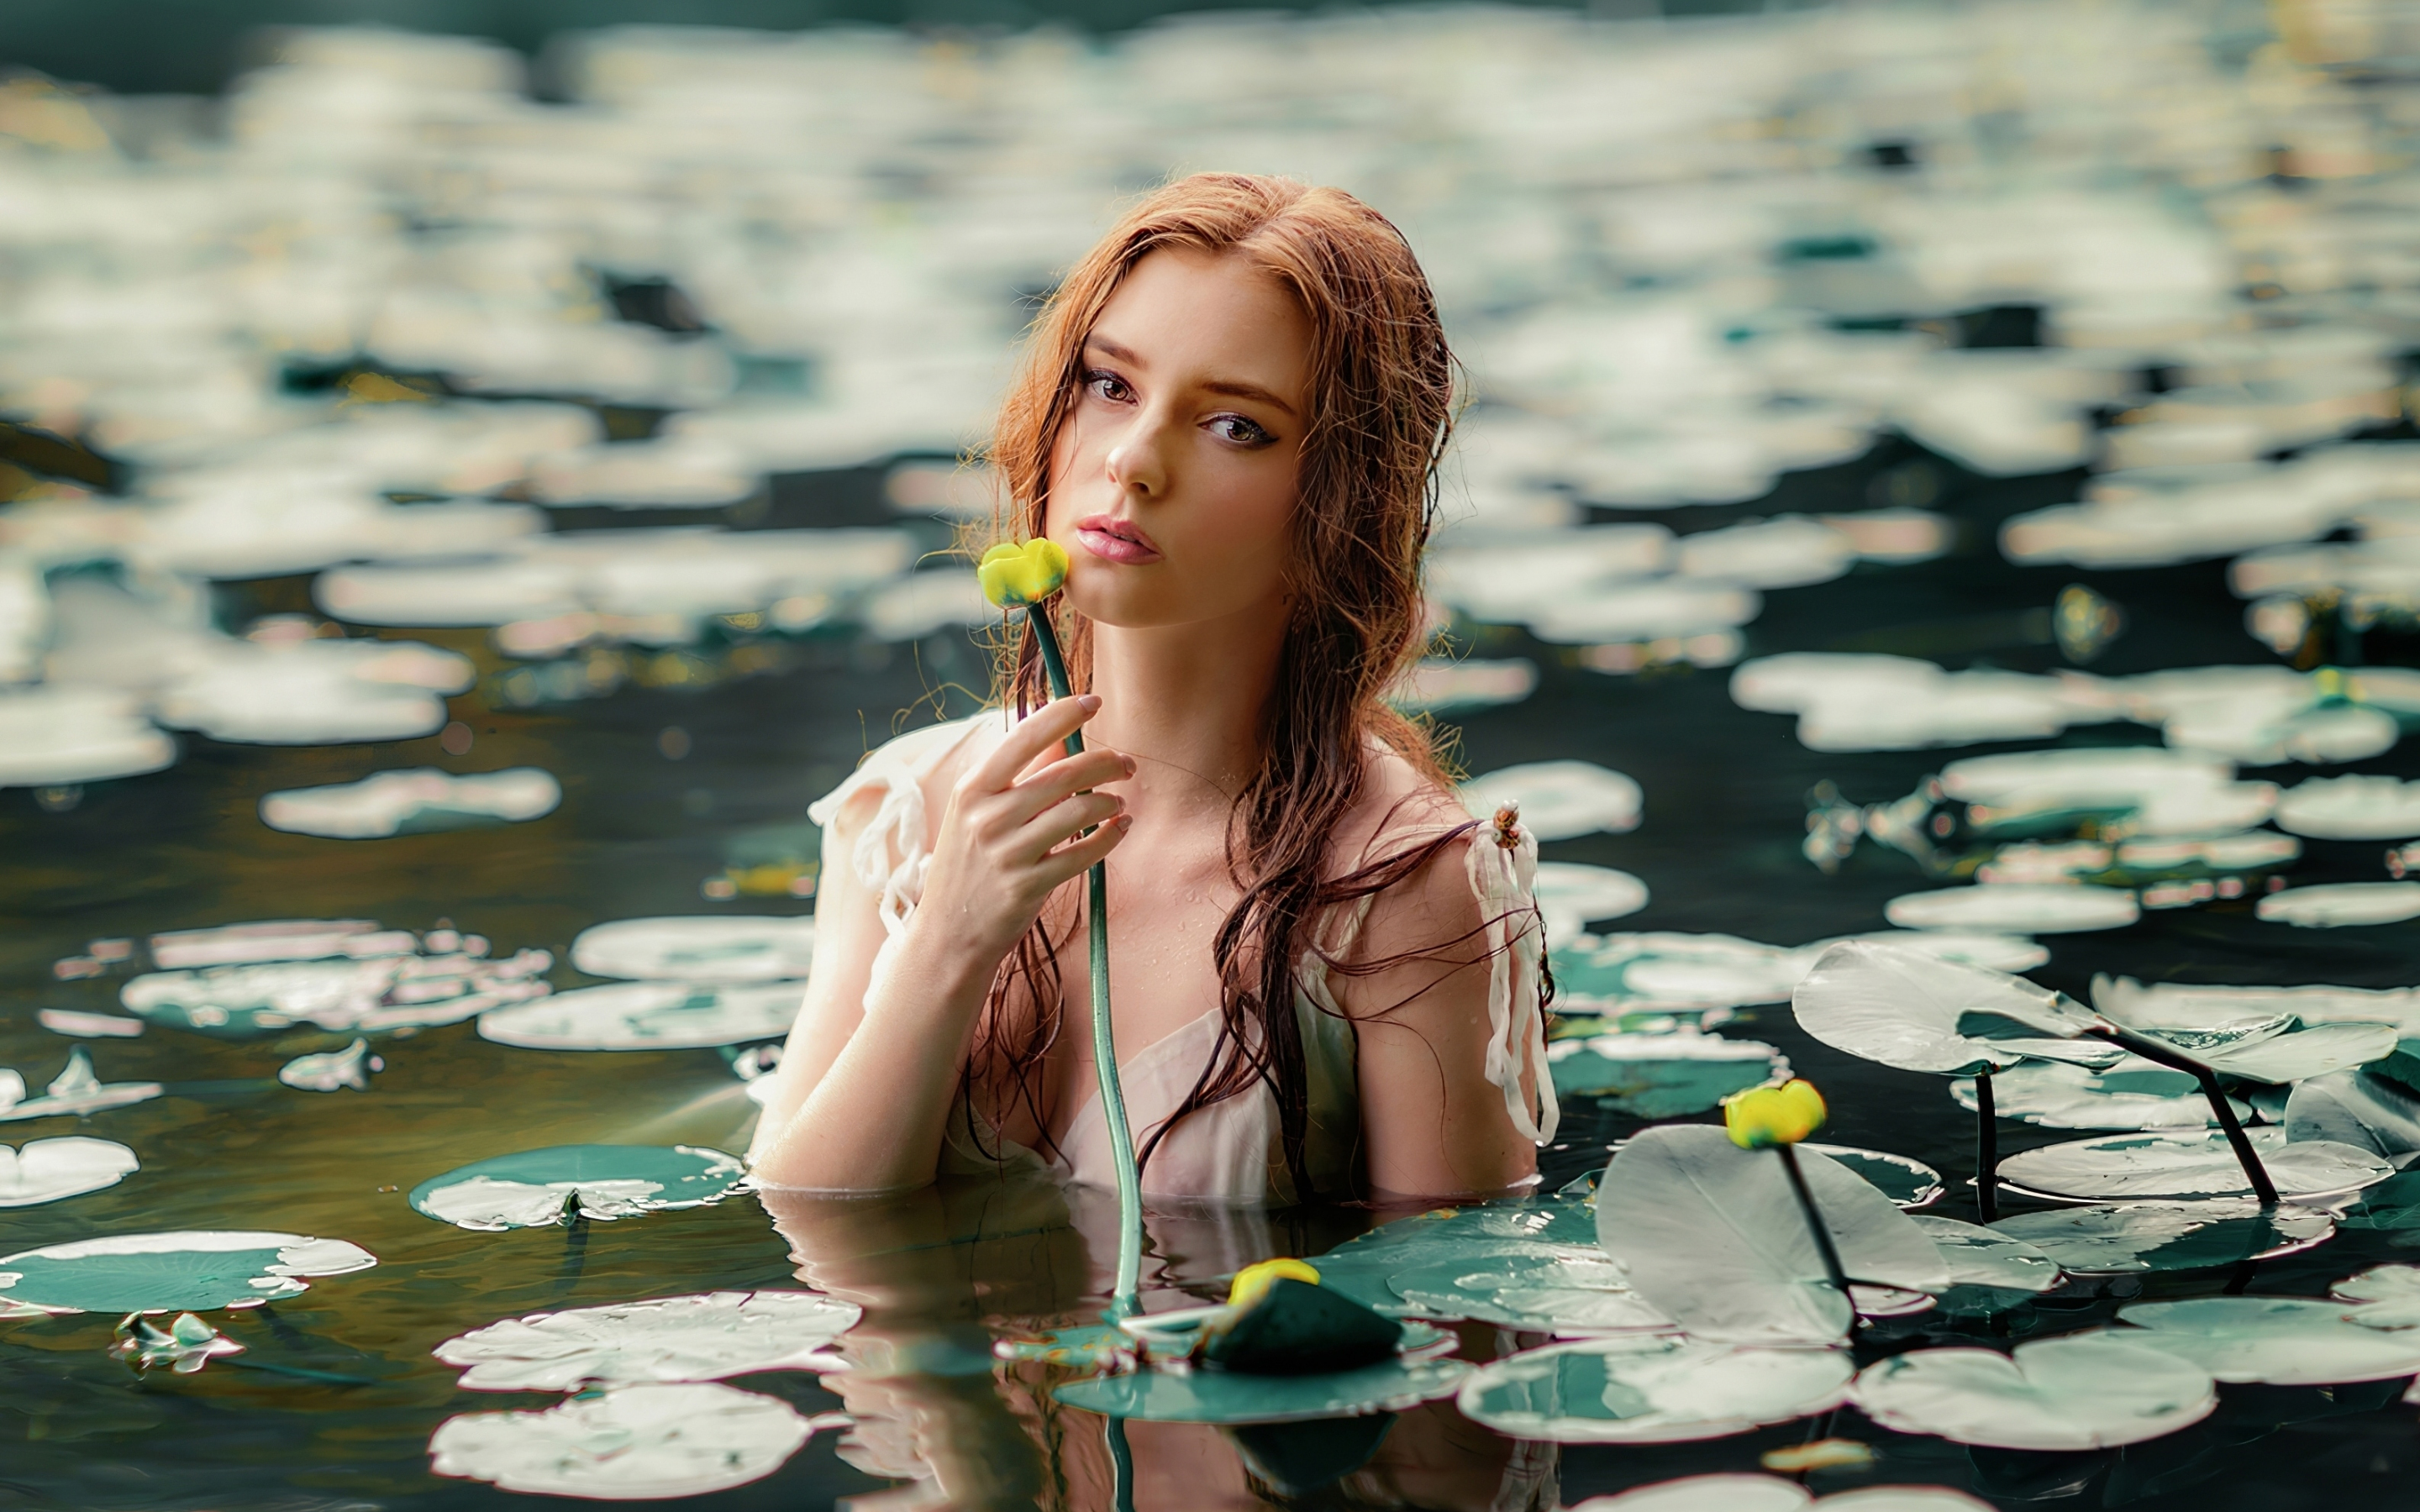 Girl with flowers, outdoor, lake, 2880x1800 wallpaper